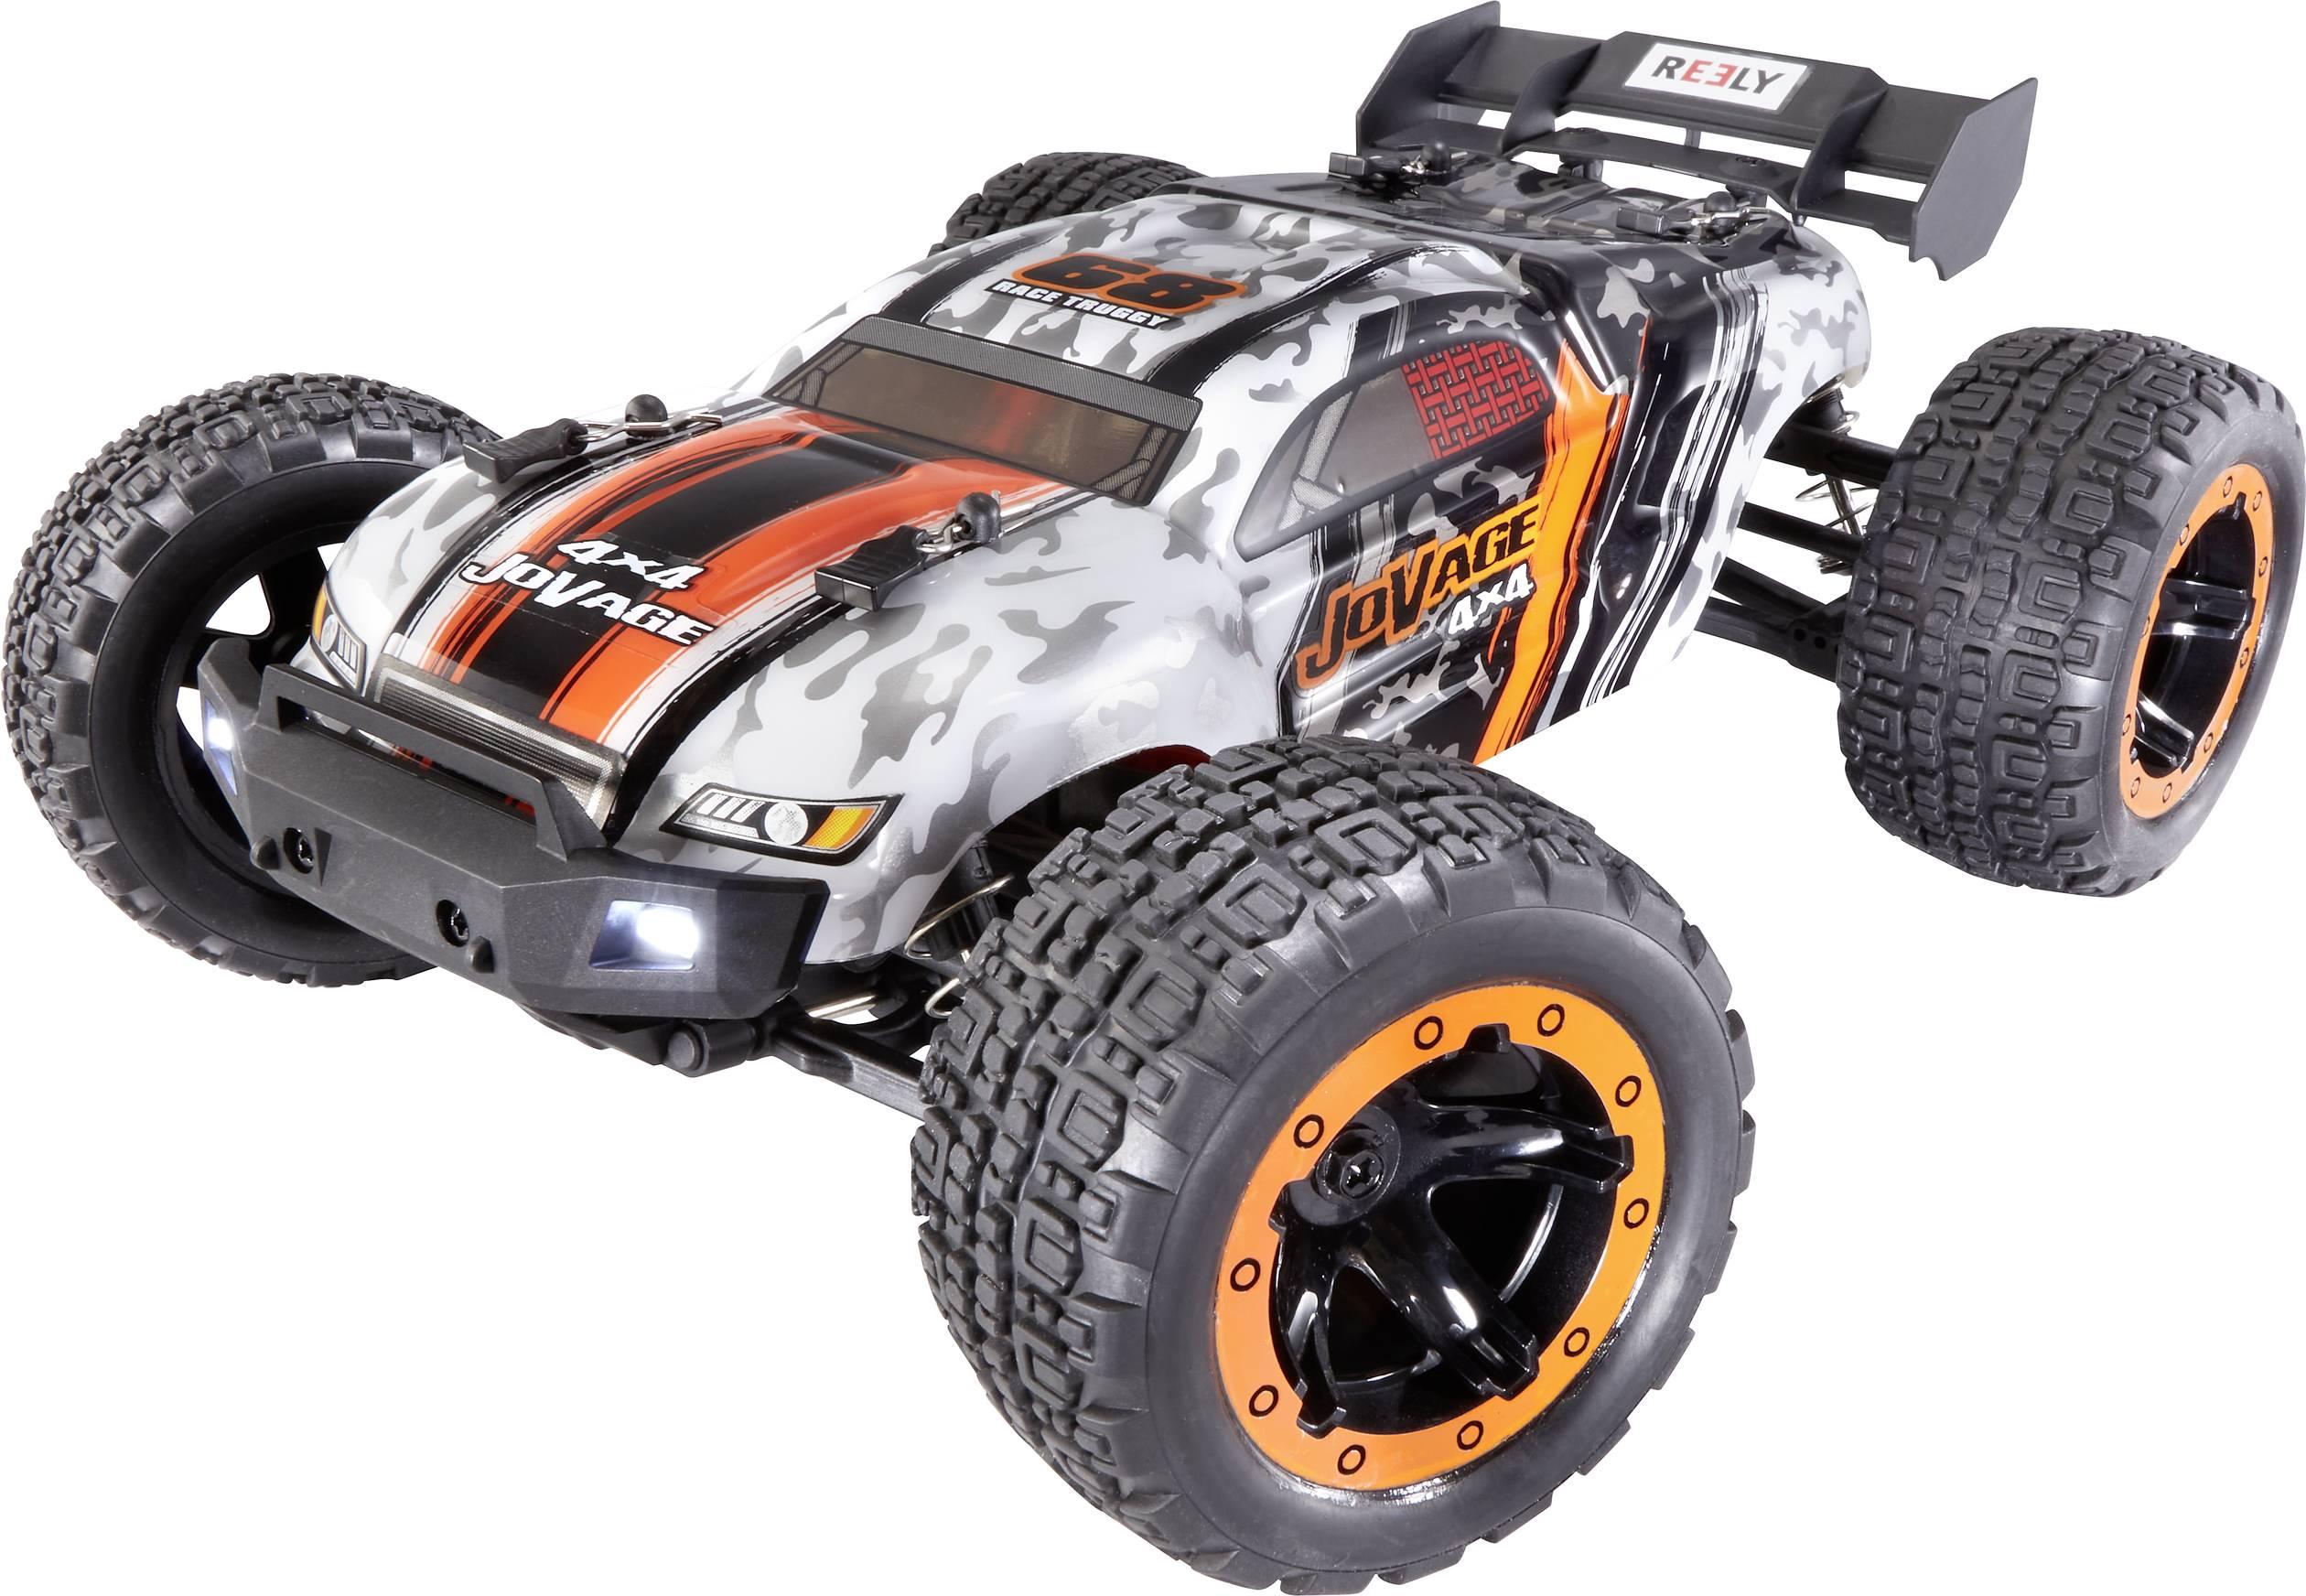 Electric Racing Rc Cars: Getting started with electric racing RC cars